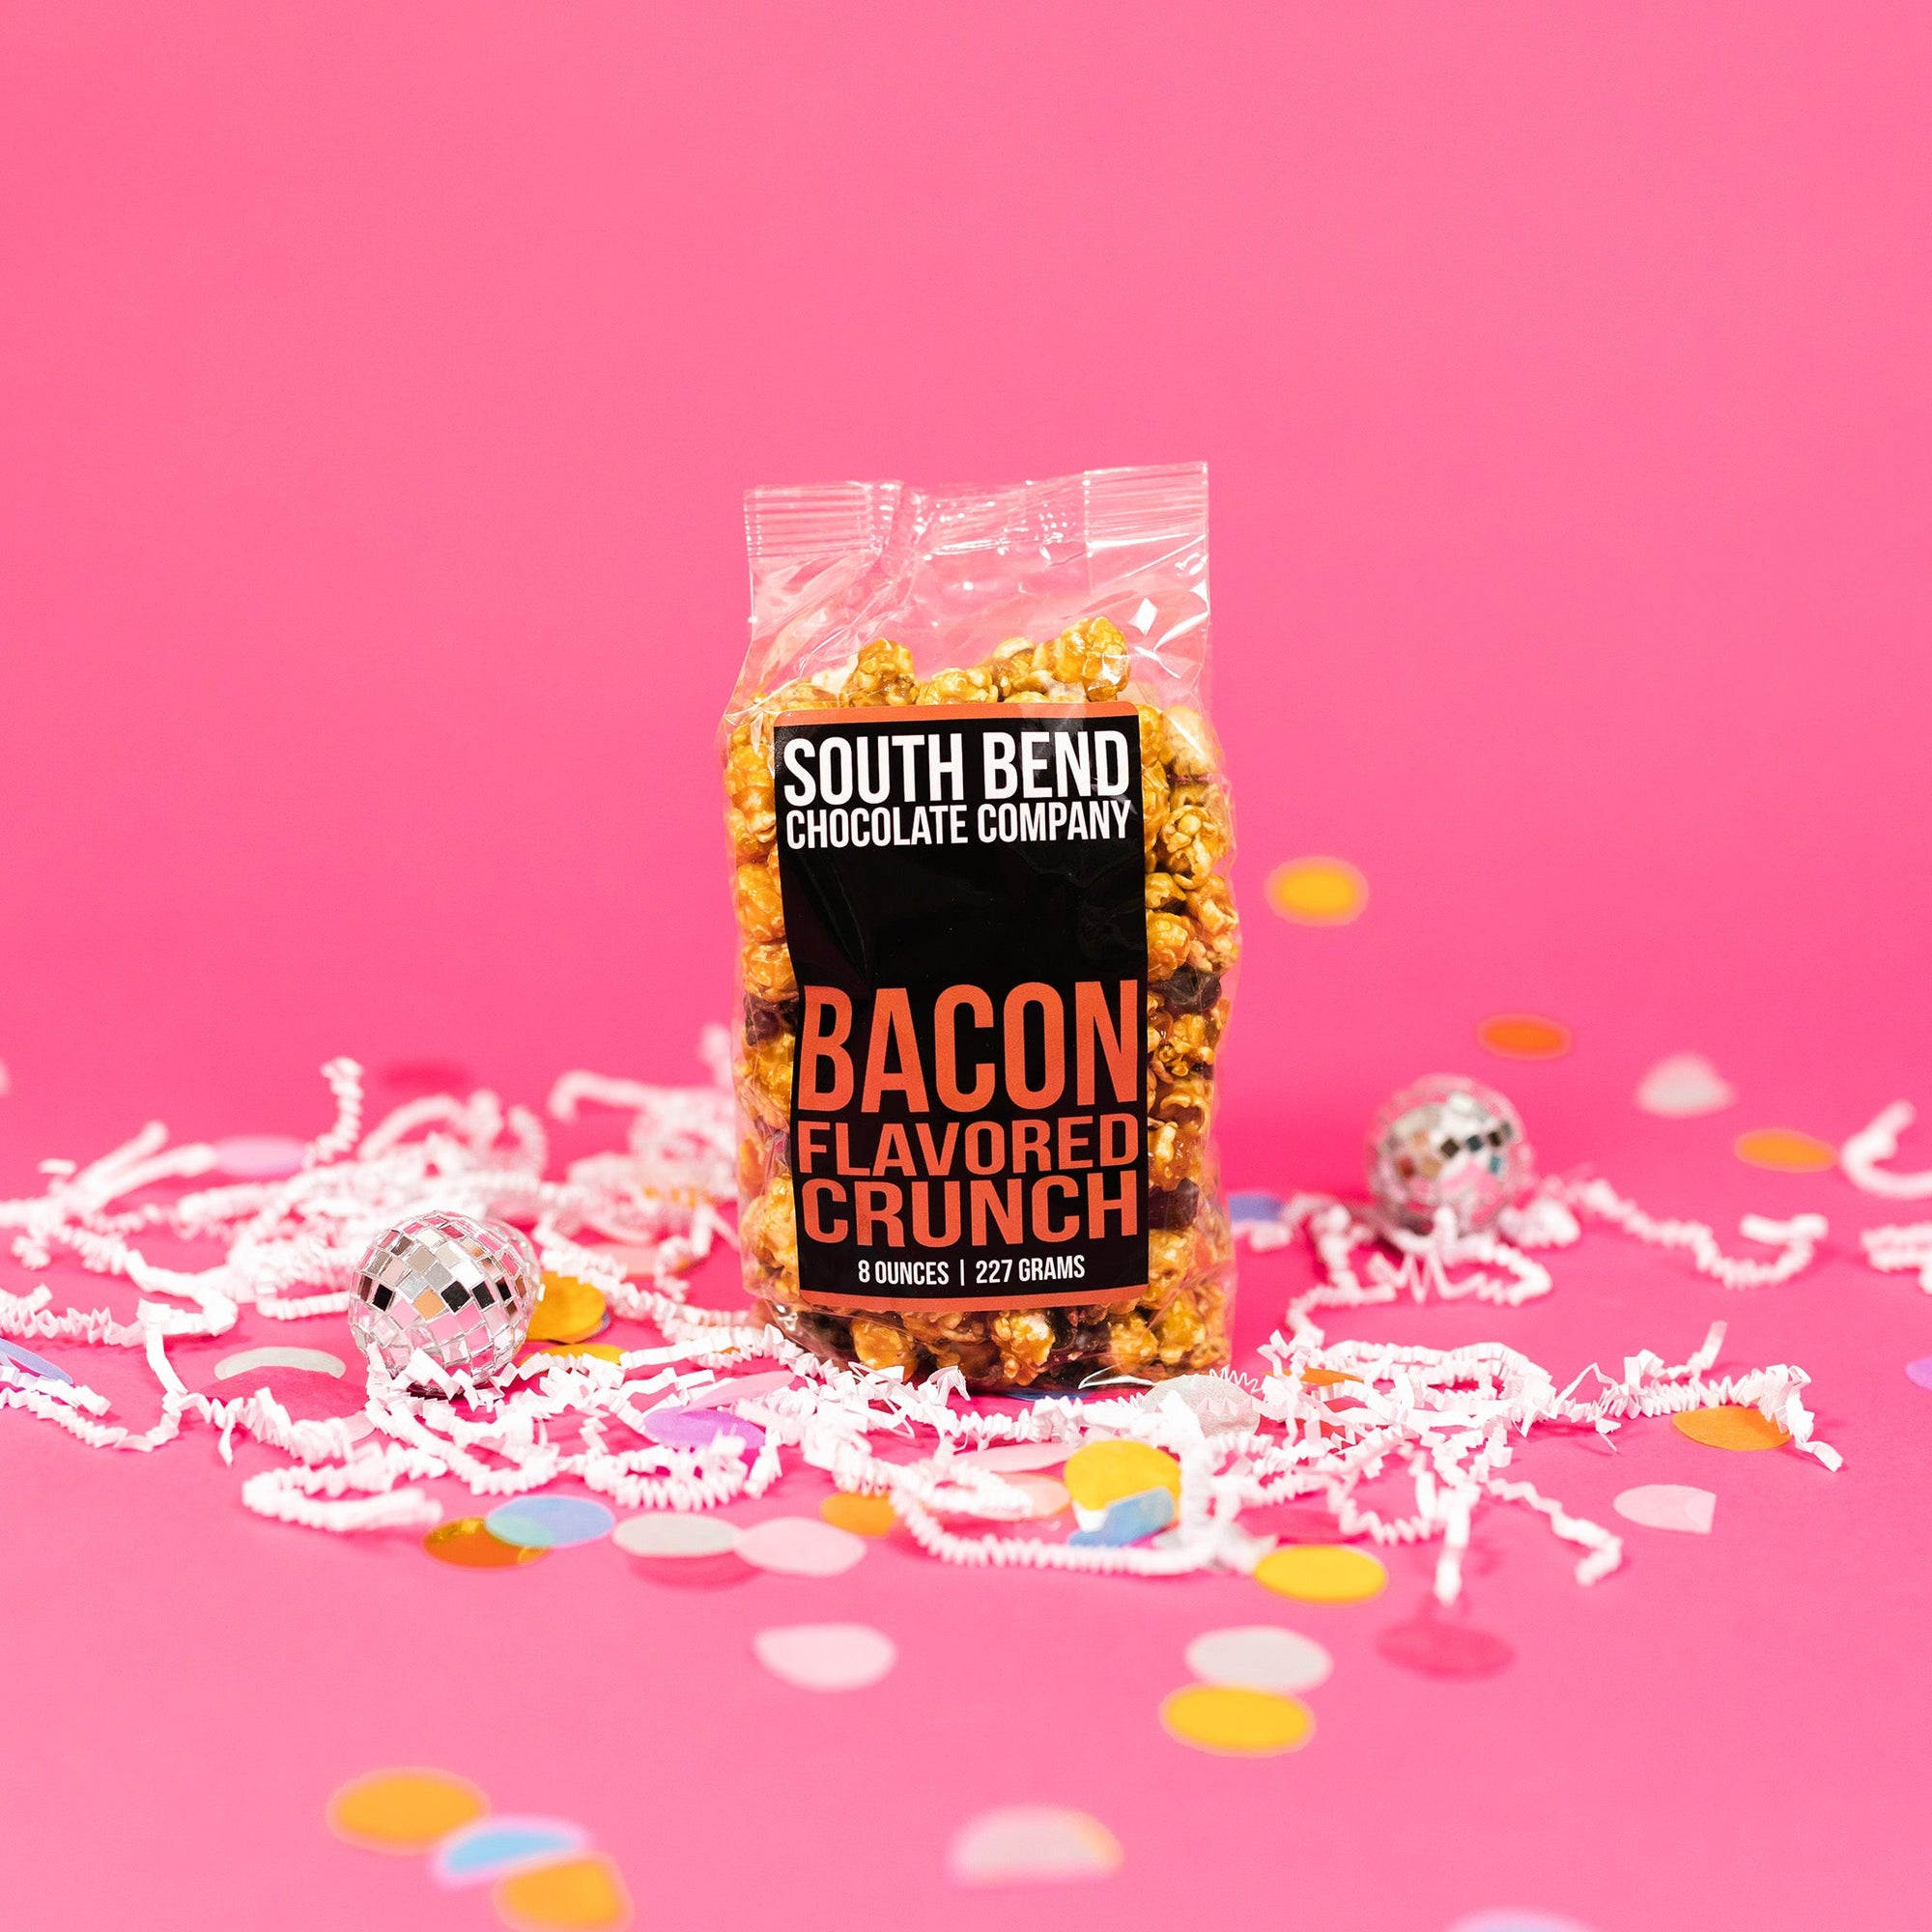 On a bubblegum pink background sits a bag with white crinkle and big, colorful confetti scattered around. There are mini disco balls. This package has a black label and it says in white all caps lettering "SOUTH BEND CHOCOLATE COMPANY" and in orange all caps lettering "BACON FLAVORED CRUNCH." 8 ounces | 227 grams